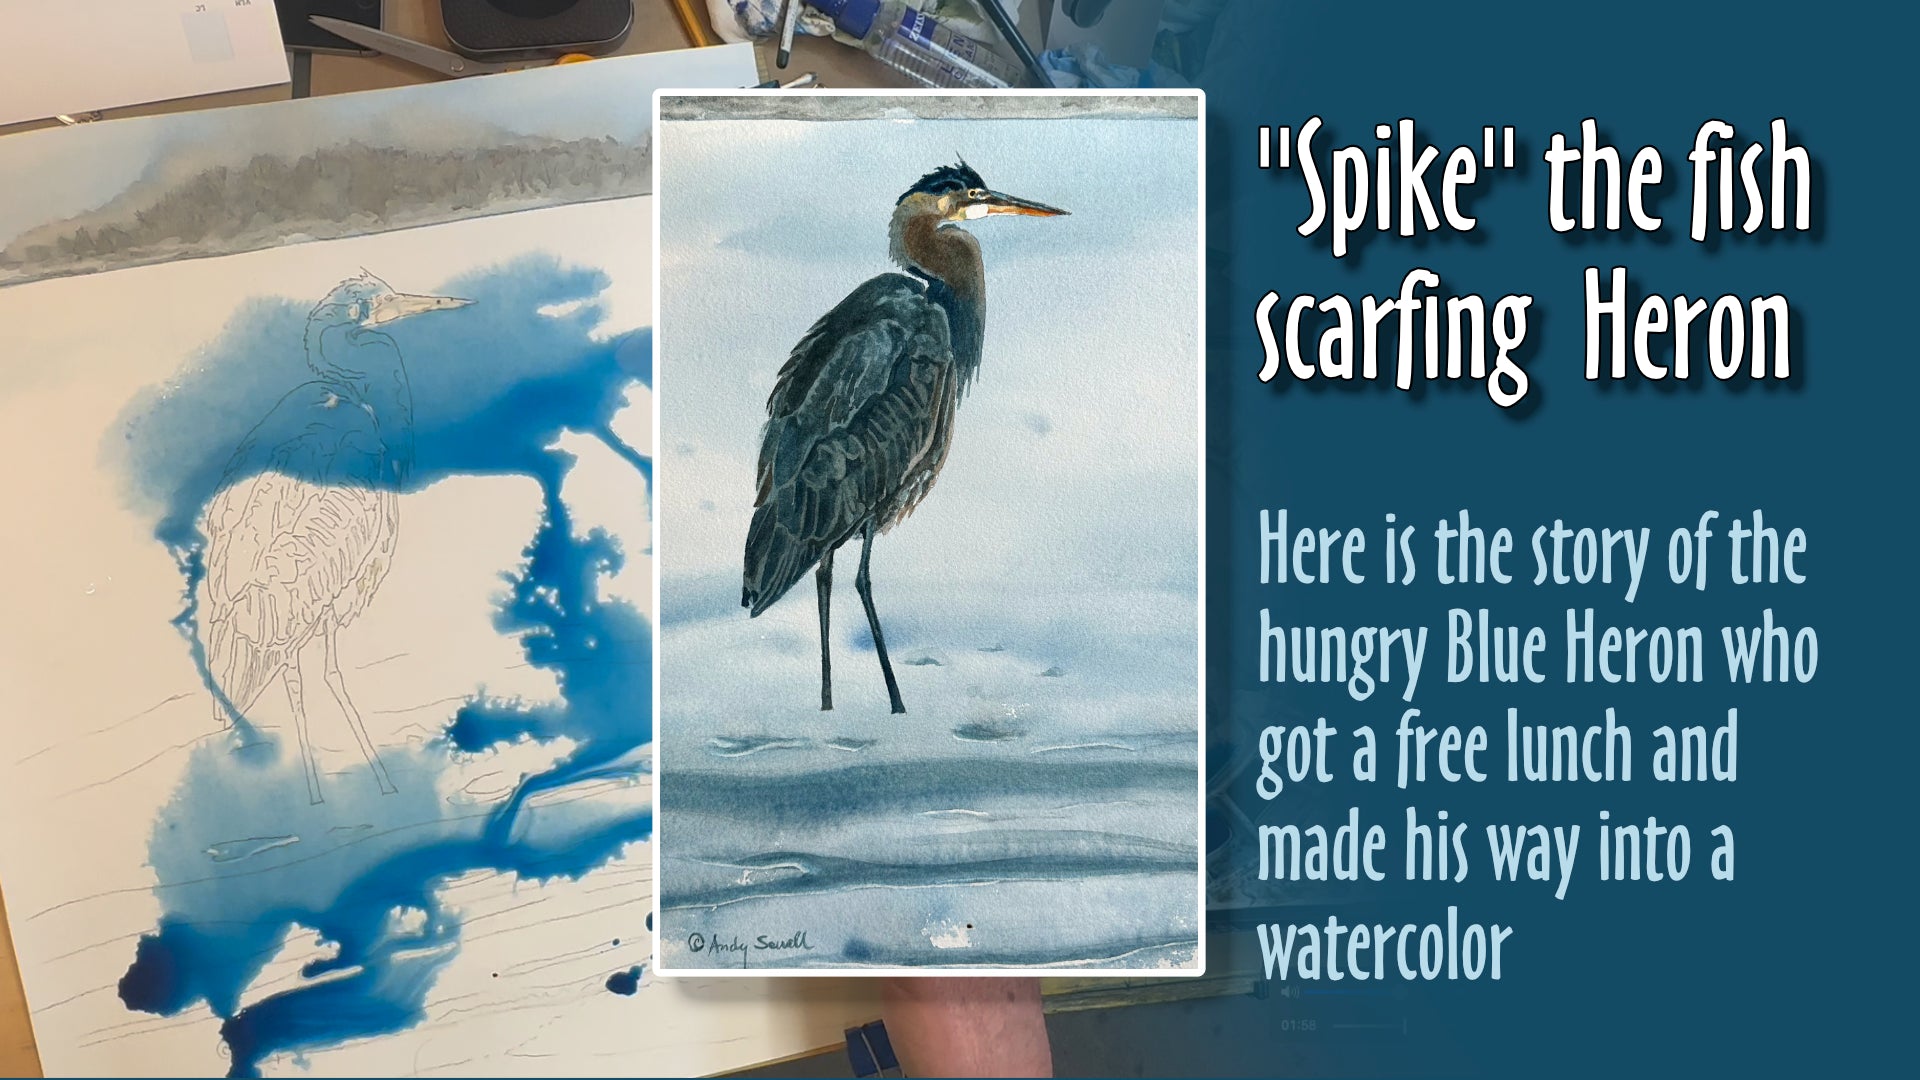 Load video: watch me paint the Heron